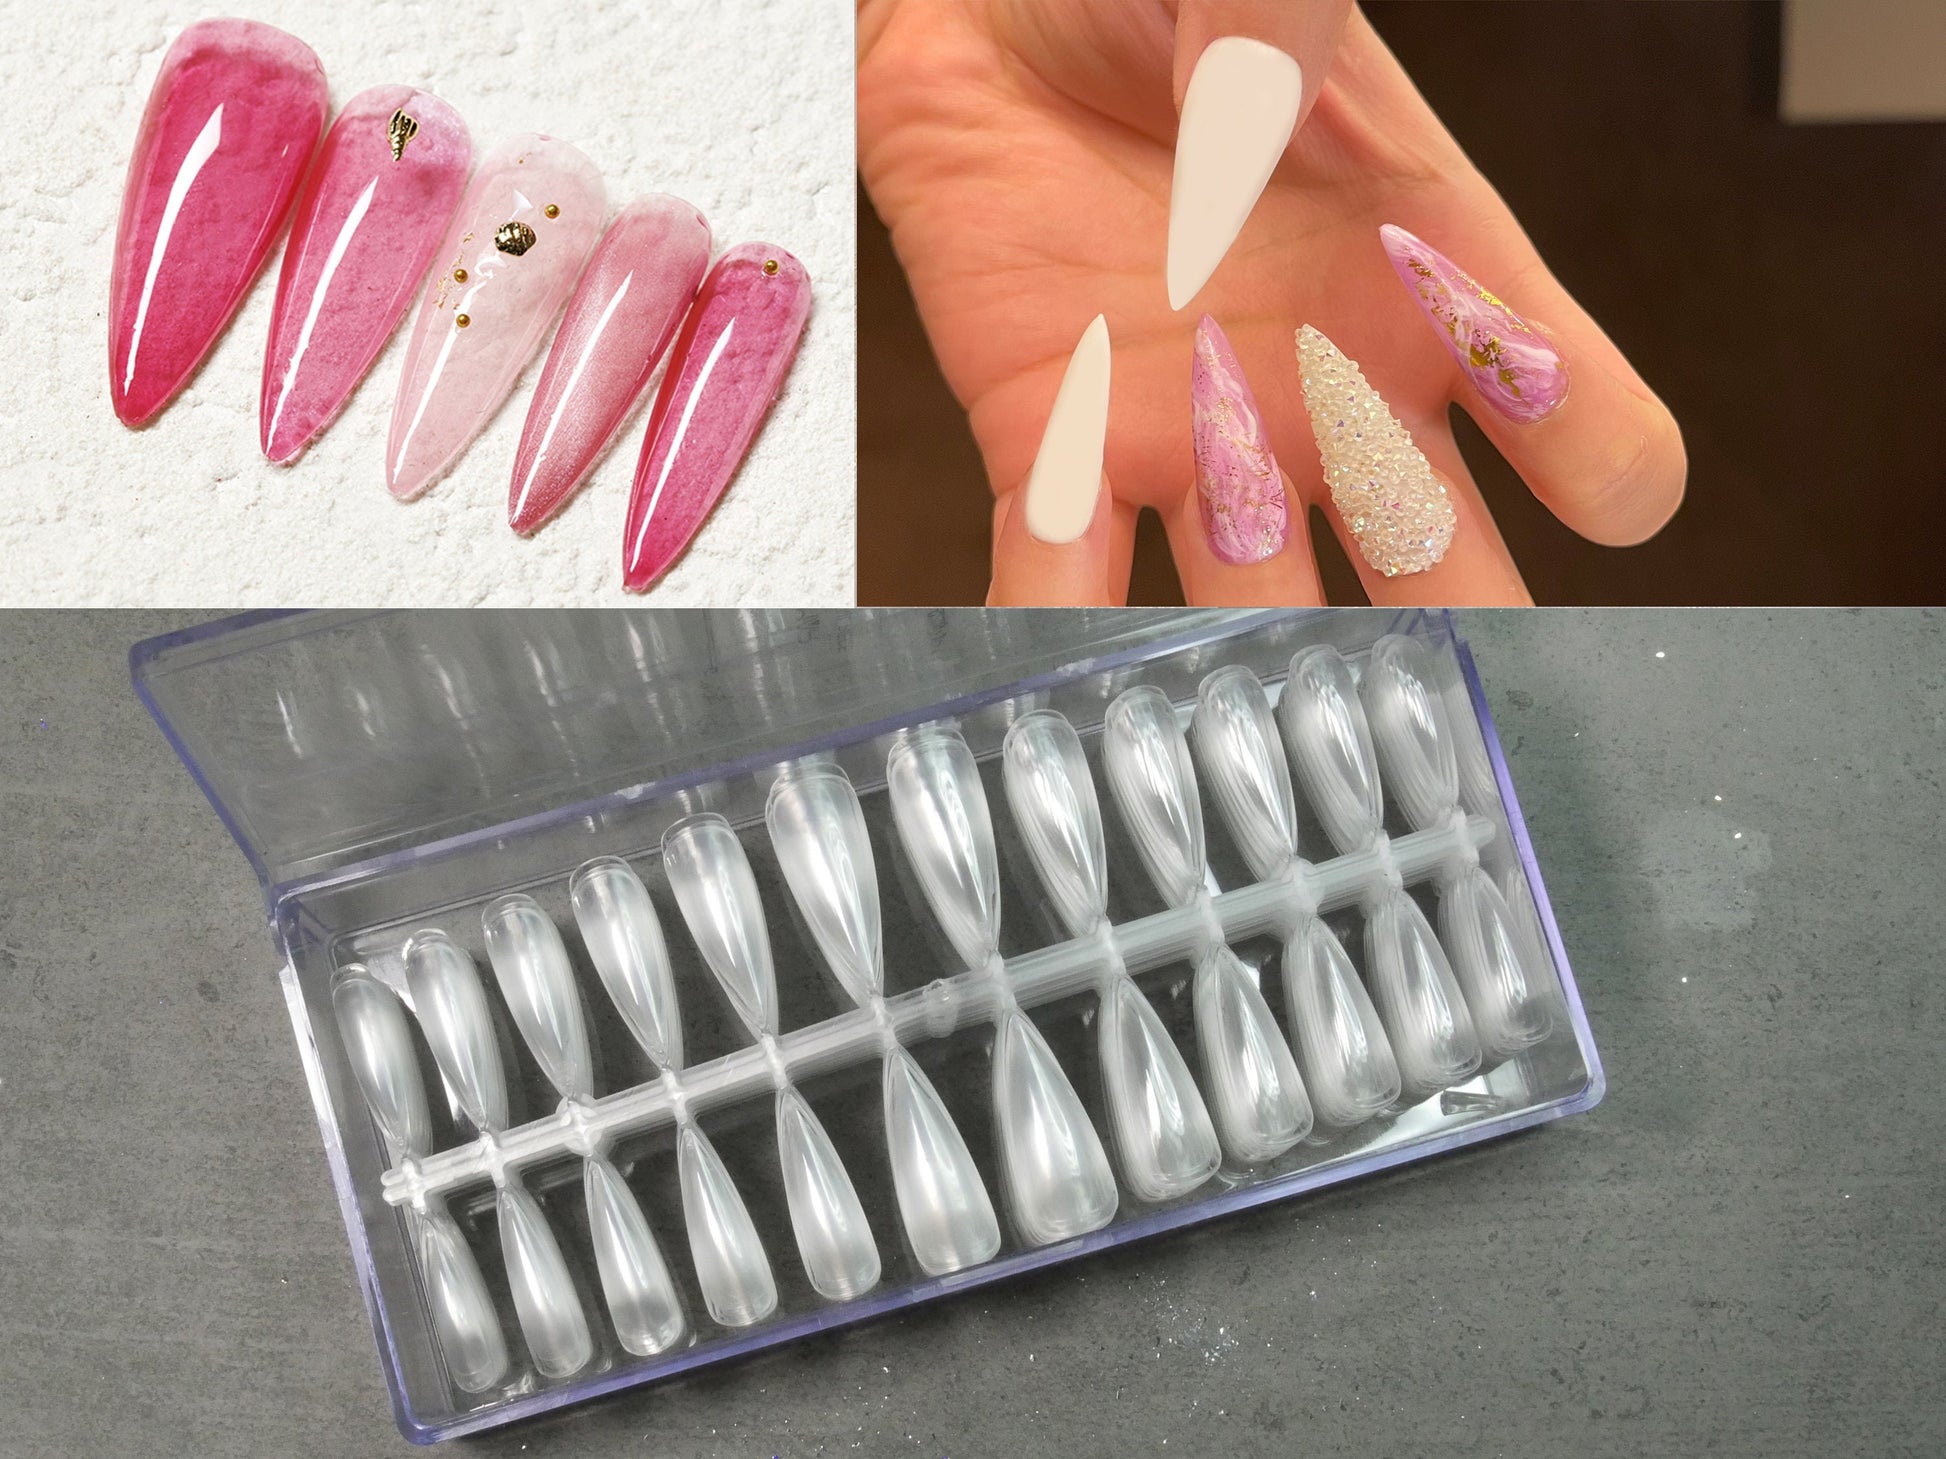 504pcs Soft Gel Tips Full Cover Coffin Stiletto Press on False Fake Nails Tips nail well tips/ Clear full Acrylic Nail Polish Manicure